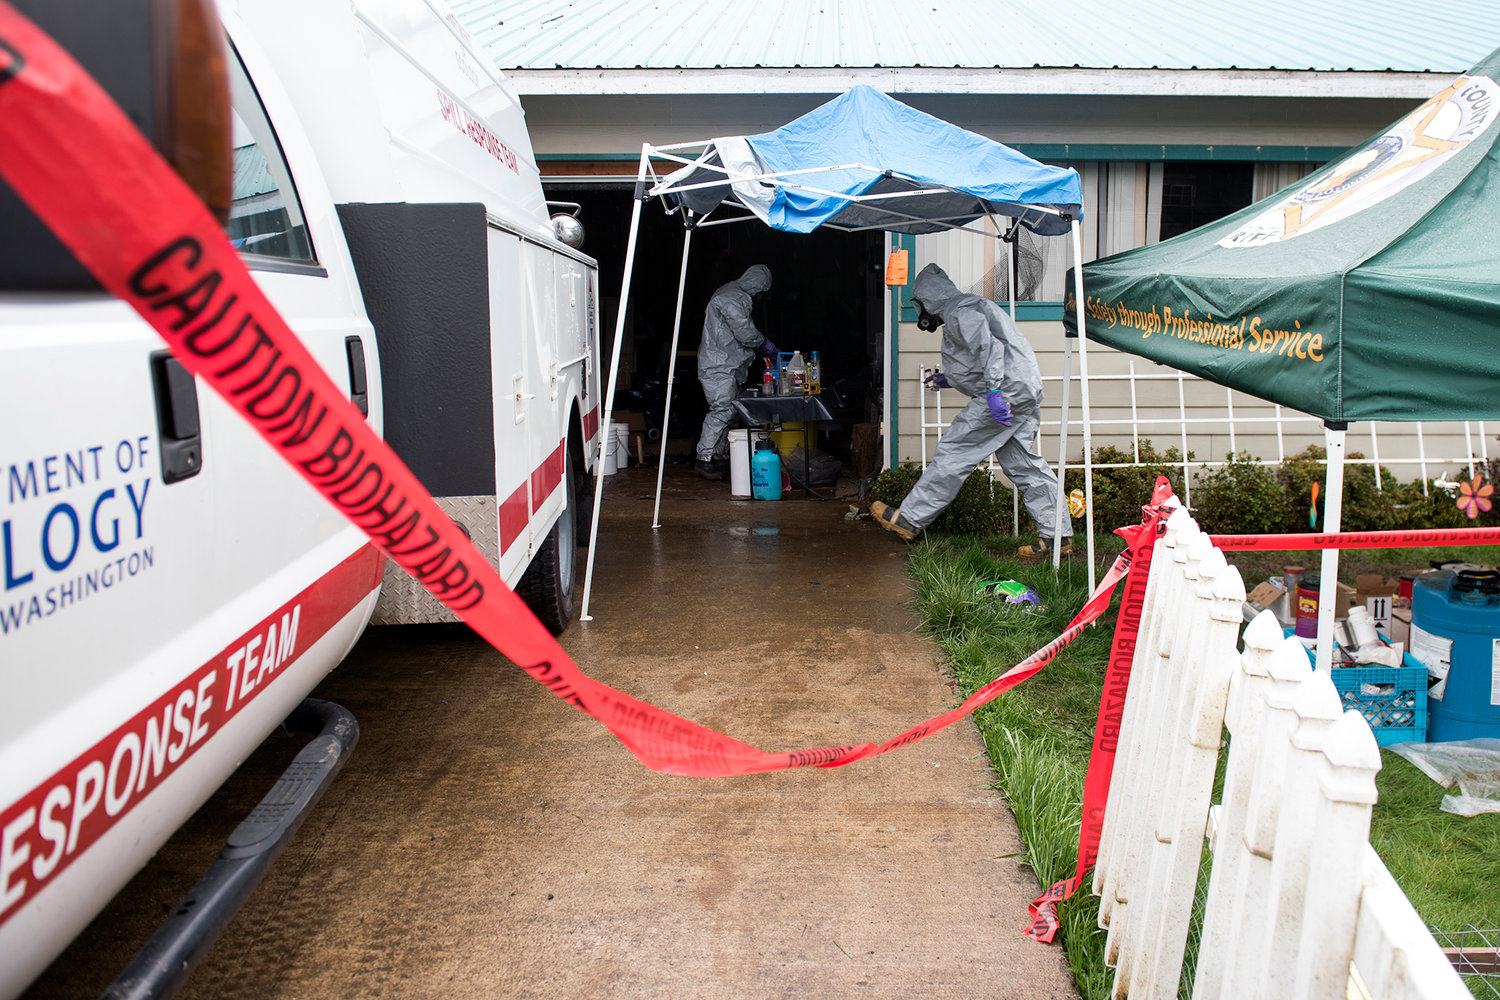 Workers from the Washington Department of Ecology's Emergency Response Team test chemicals found in an alleged methamphetamine lab on Joppish Road in Galvin on Tuesday afternoon.